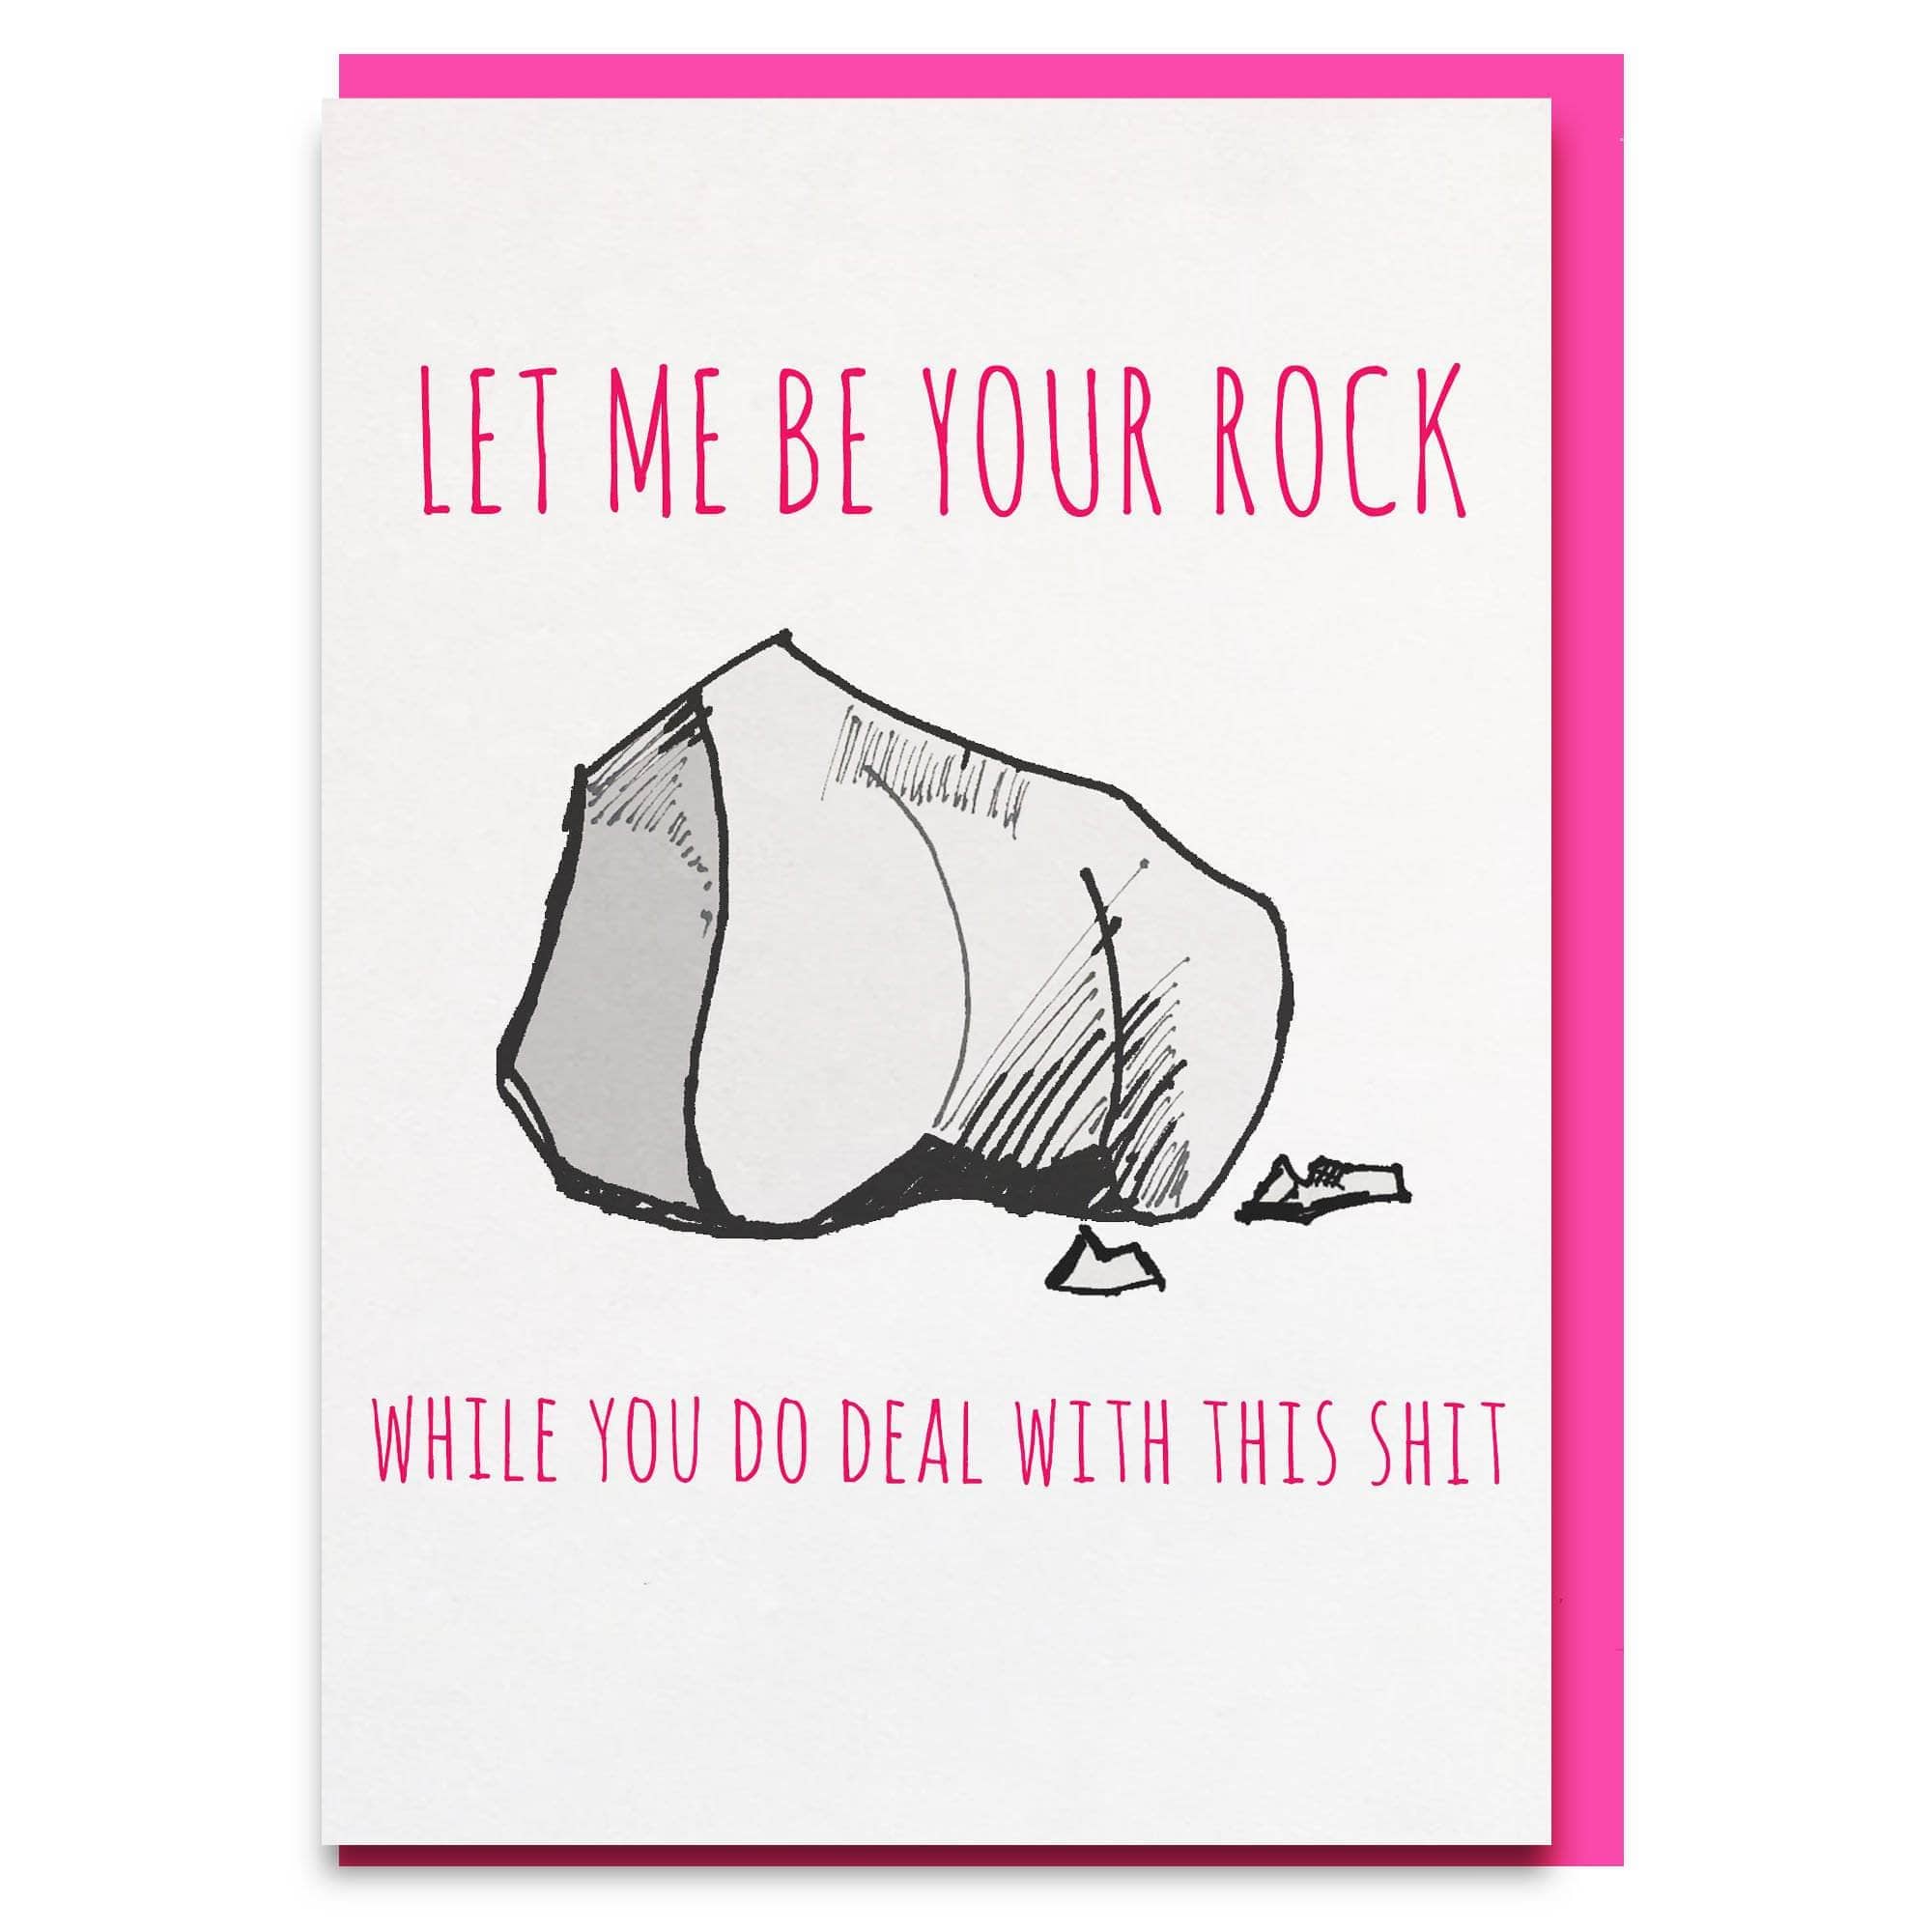 Your Rock